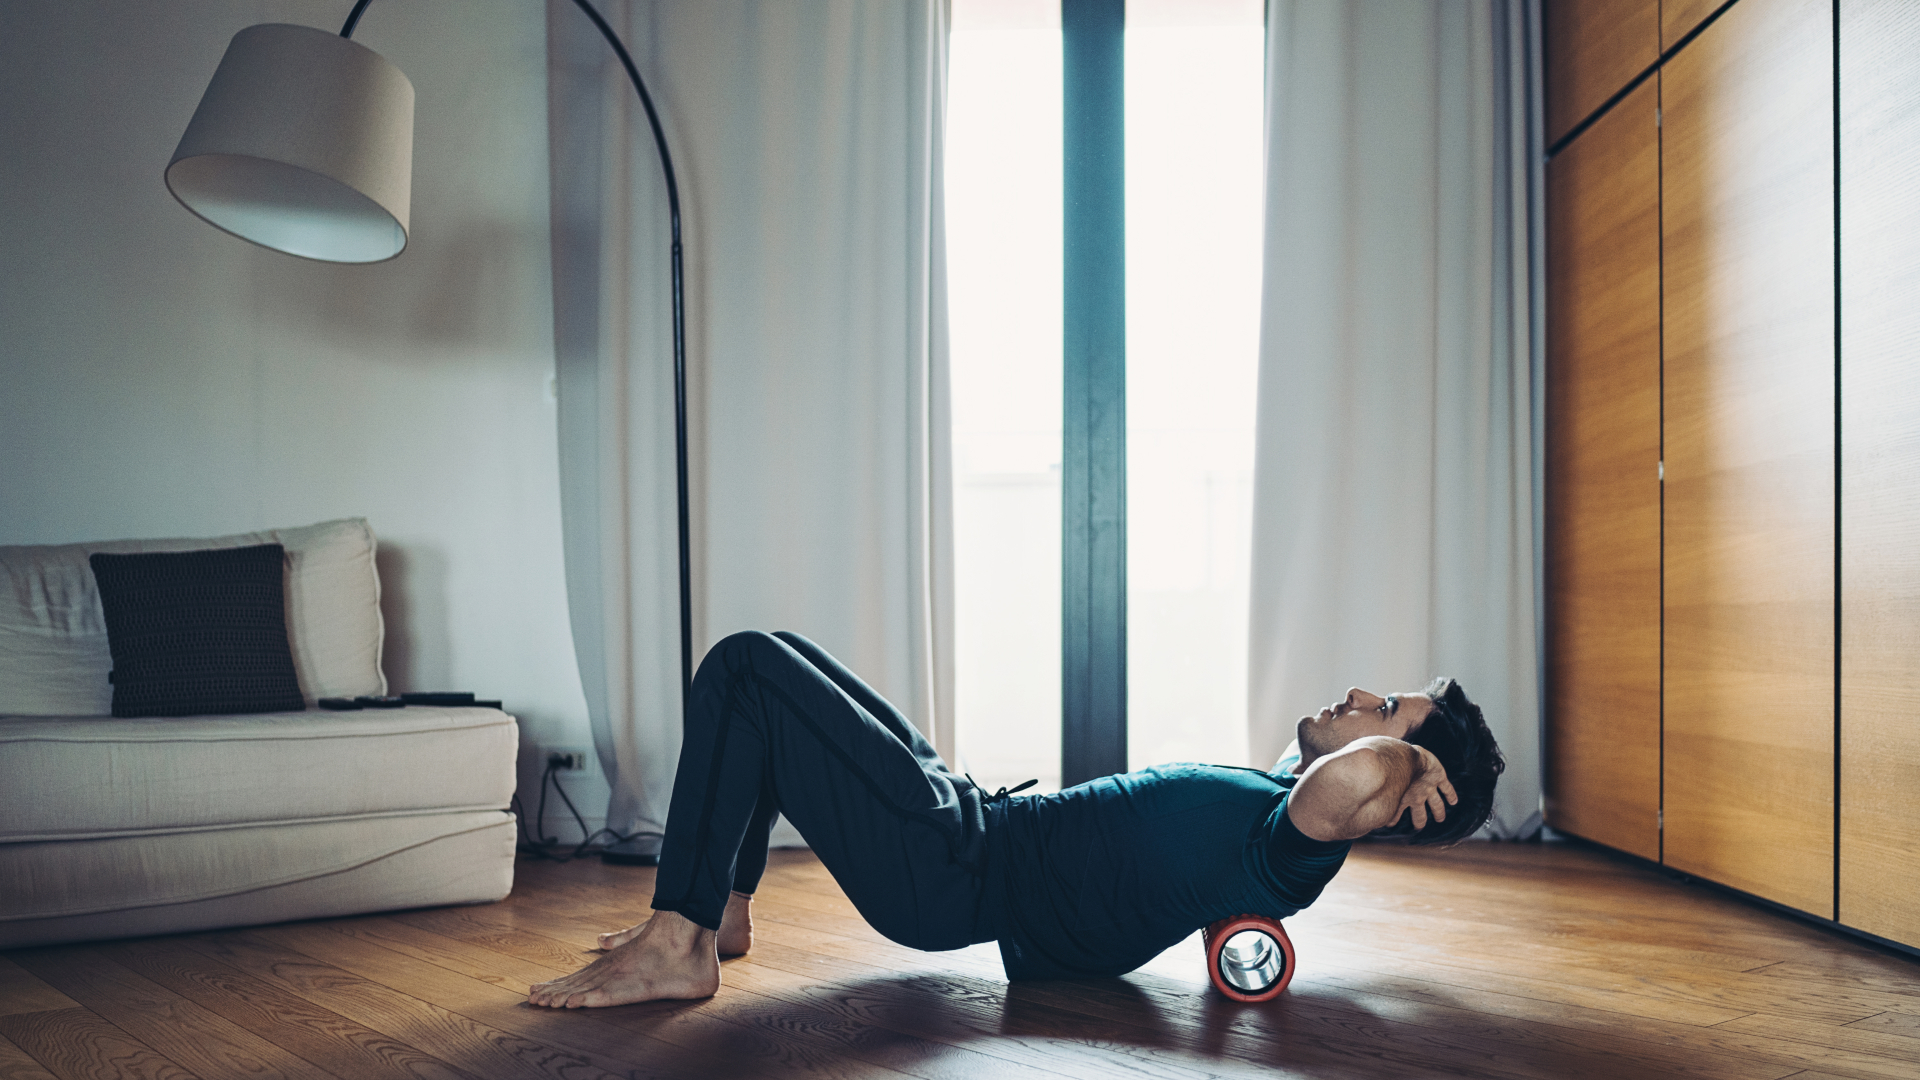 How to Foam Roll Your IT Band: 5 Physio Tips To Make it Easier